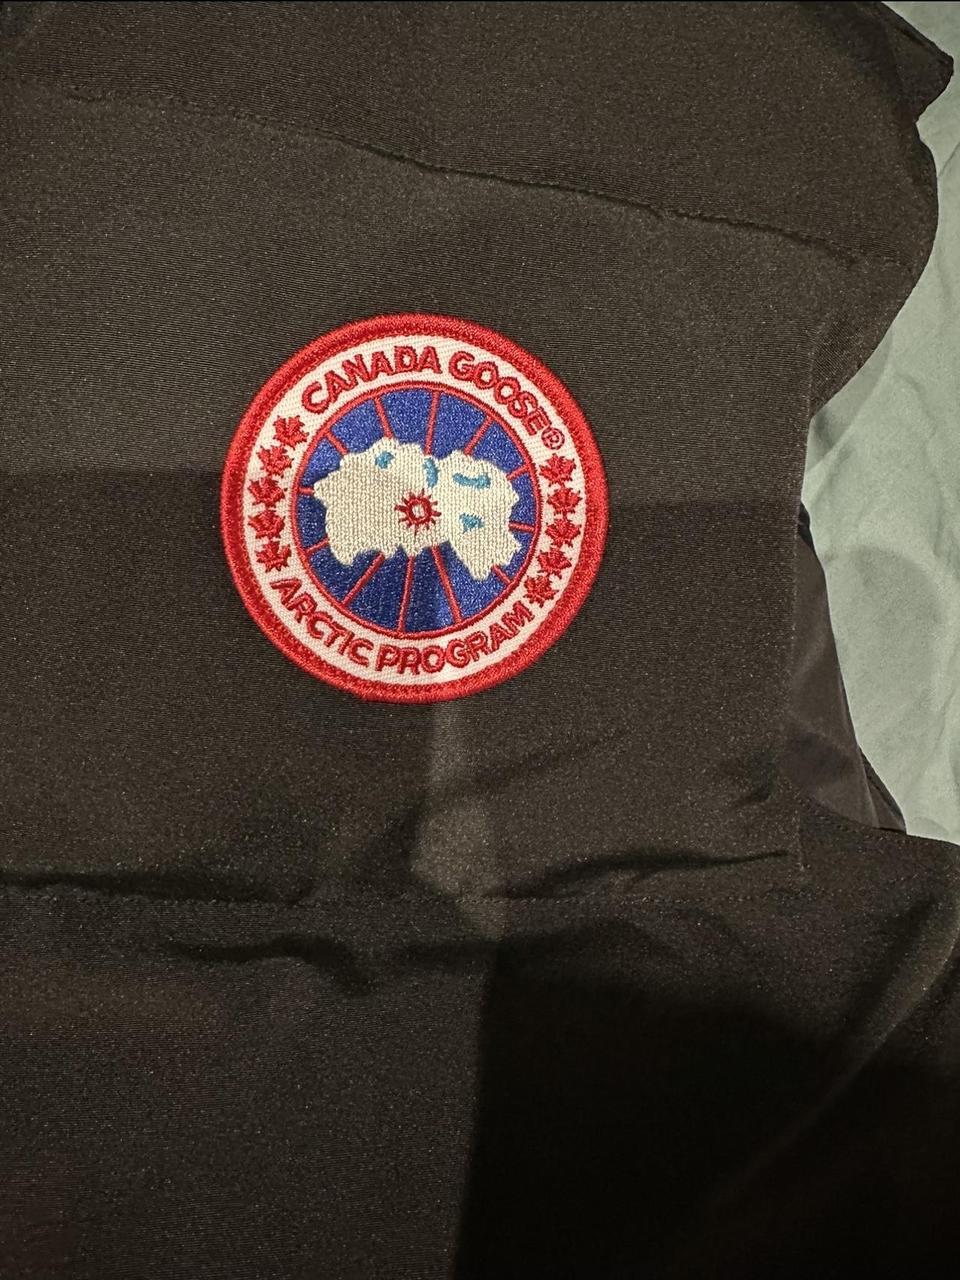 CANADA GOOSE GILET. This body warmer is colour black... - Depop